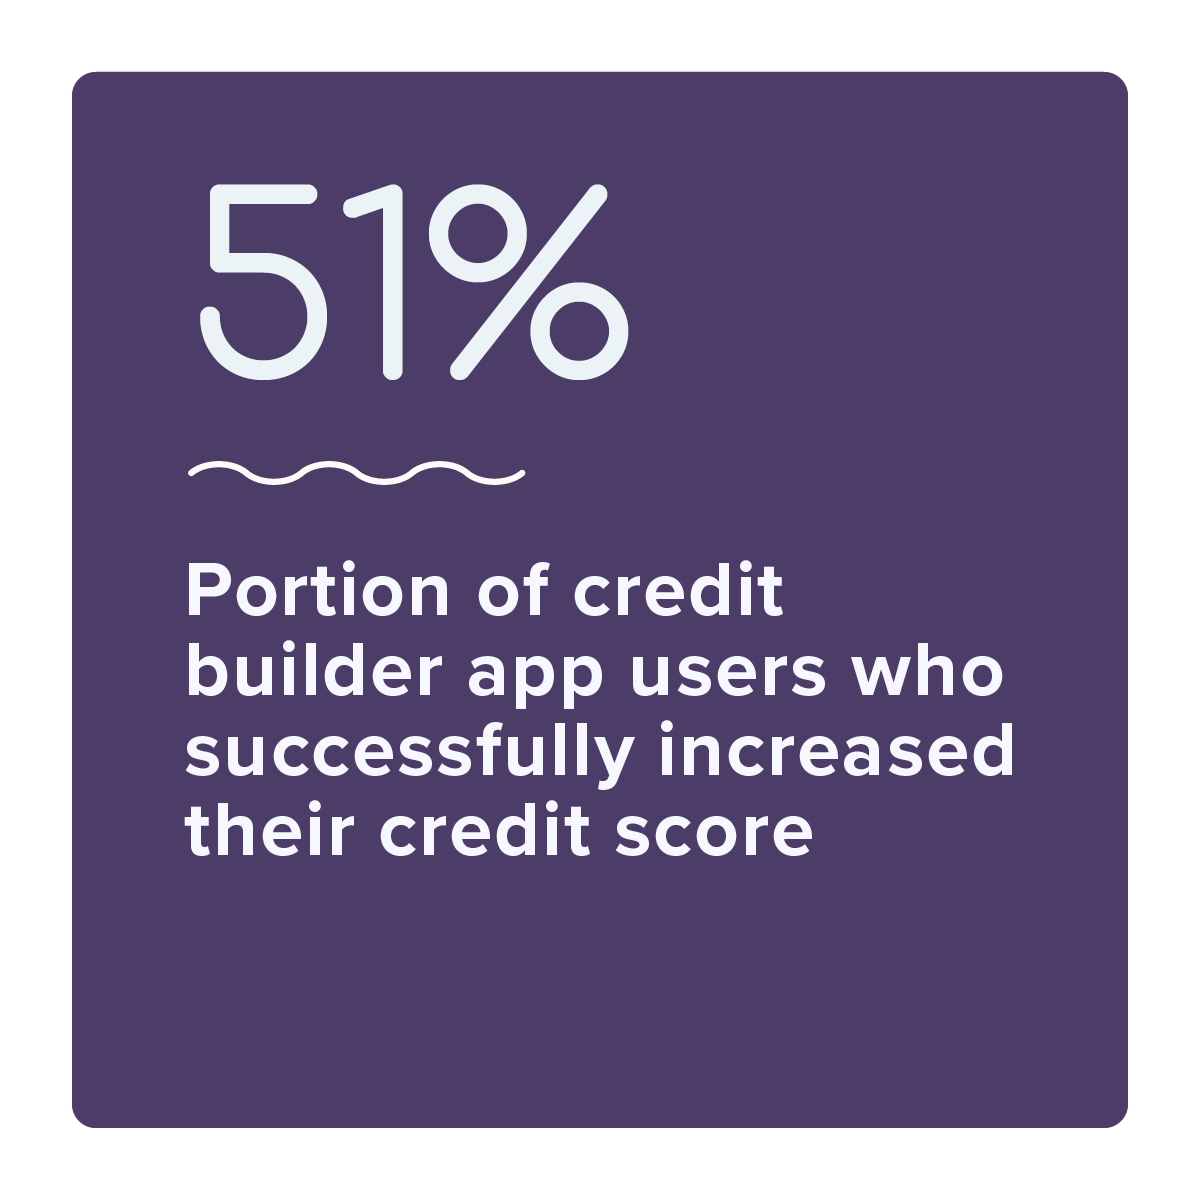 51%: Portion of credit builder app users who successfully increased their credit score